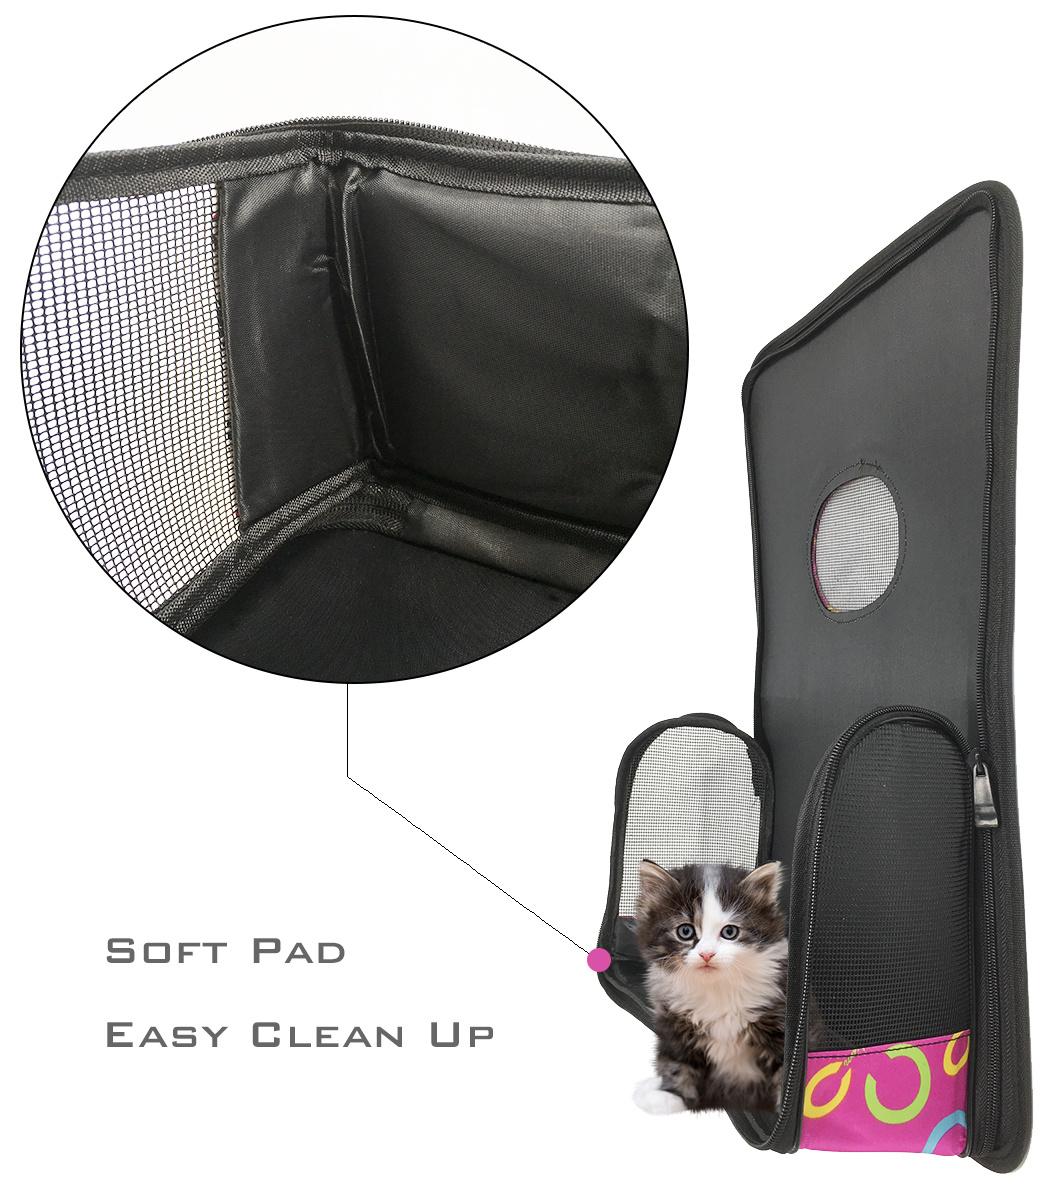 Pet Carrier Soft Sided for Cats and Dogs Portable Cozy Travel Pet Bag Car Seat Safe Carrier